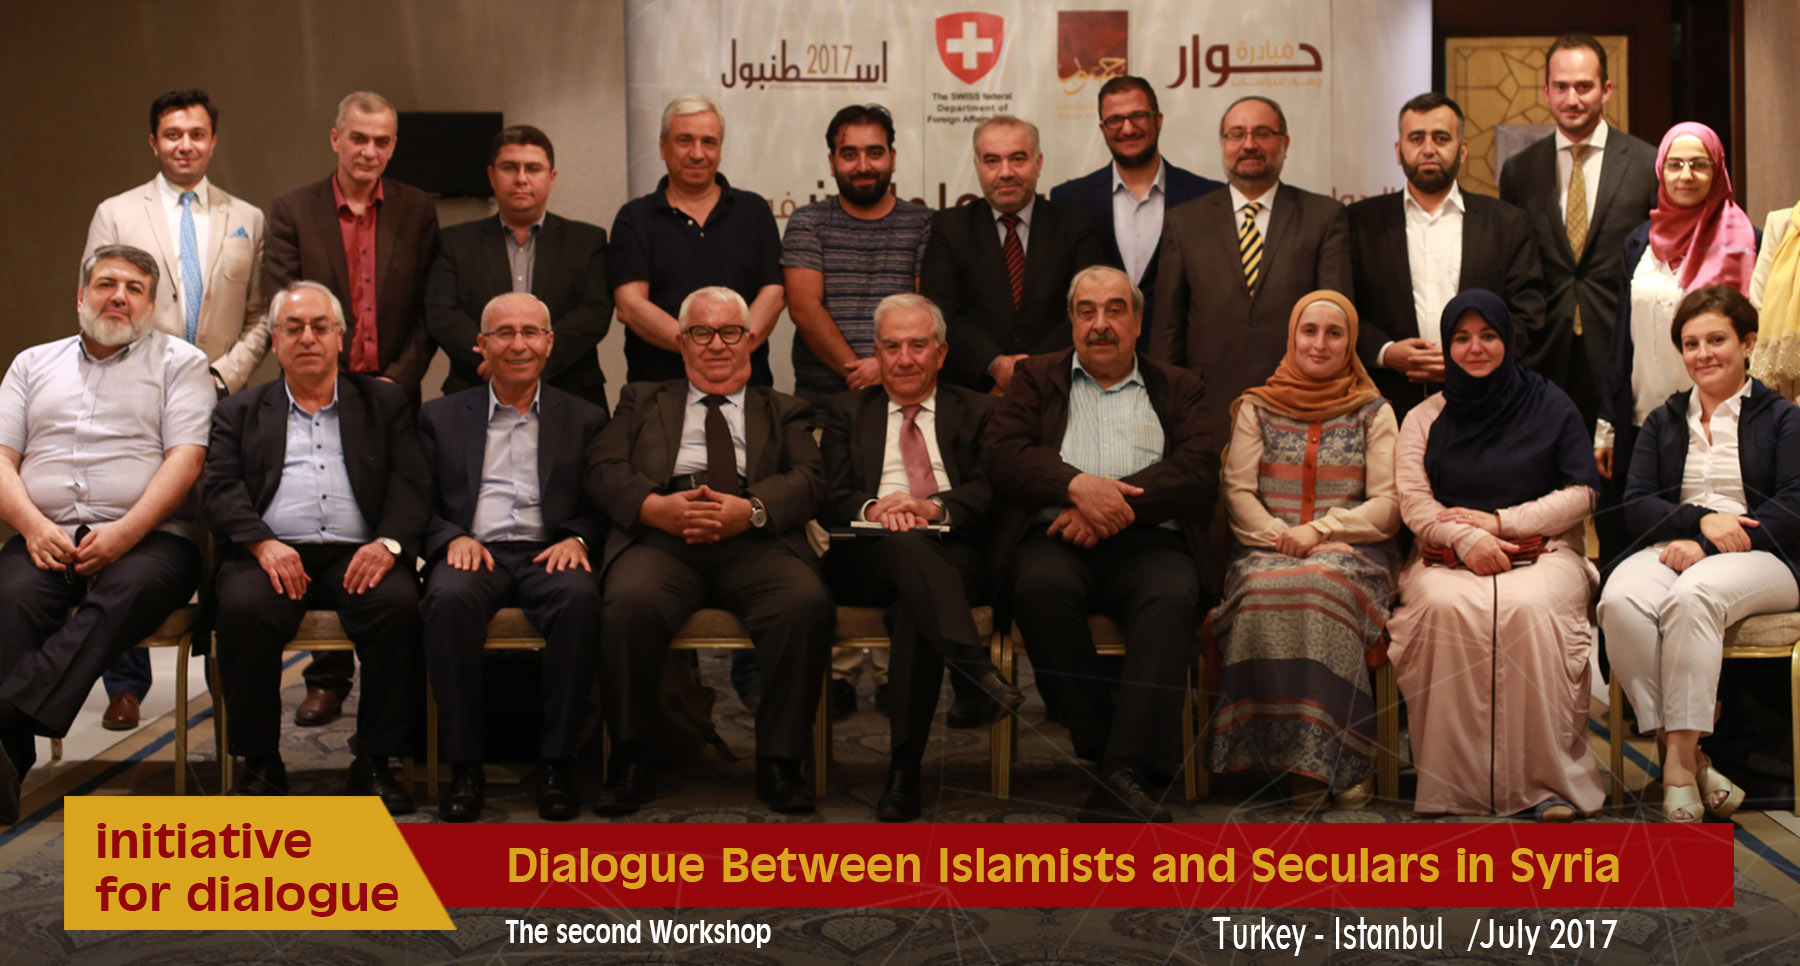 The second meeting of the workshop for The Dialogue Between Islamists and Seculars in Syria